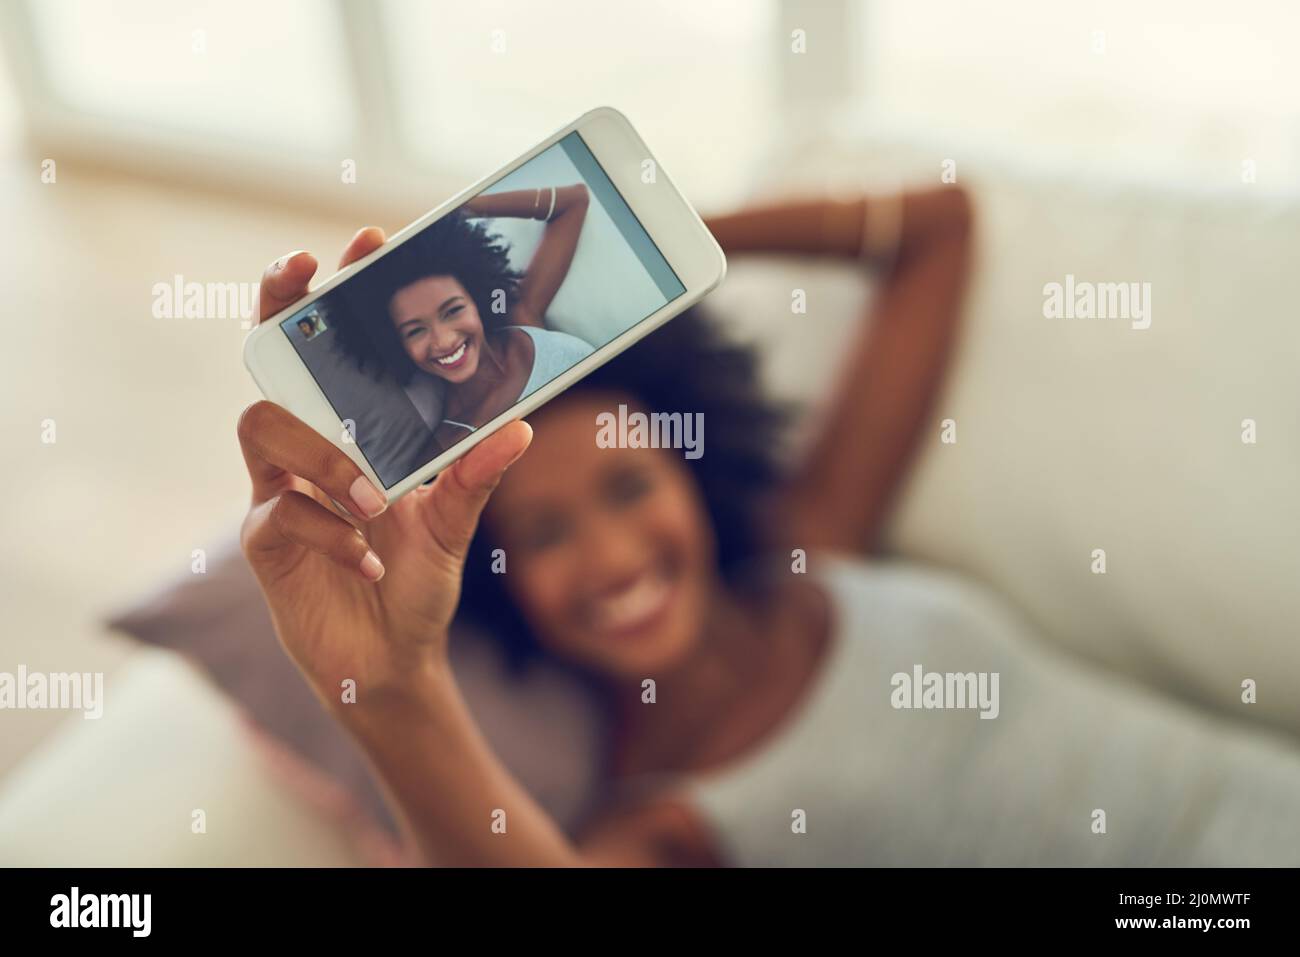 Believe in your selfie. Cropped shot of a young woman taking a photo of herself. Stock Photo